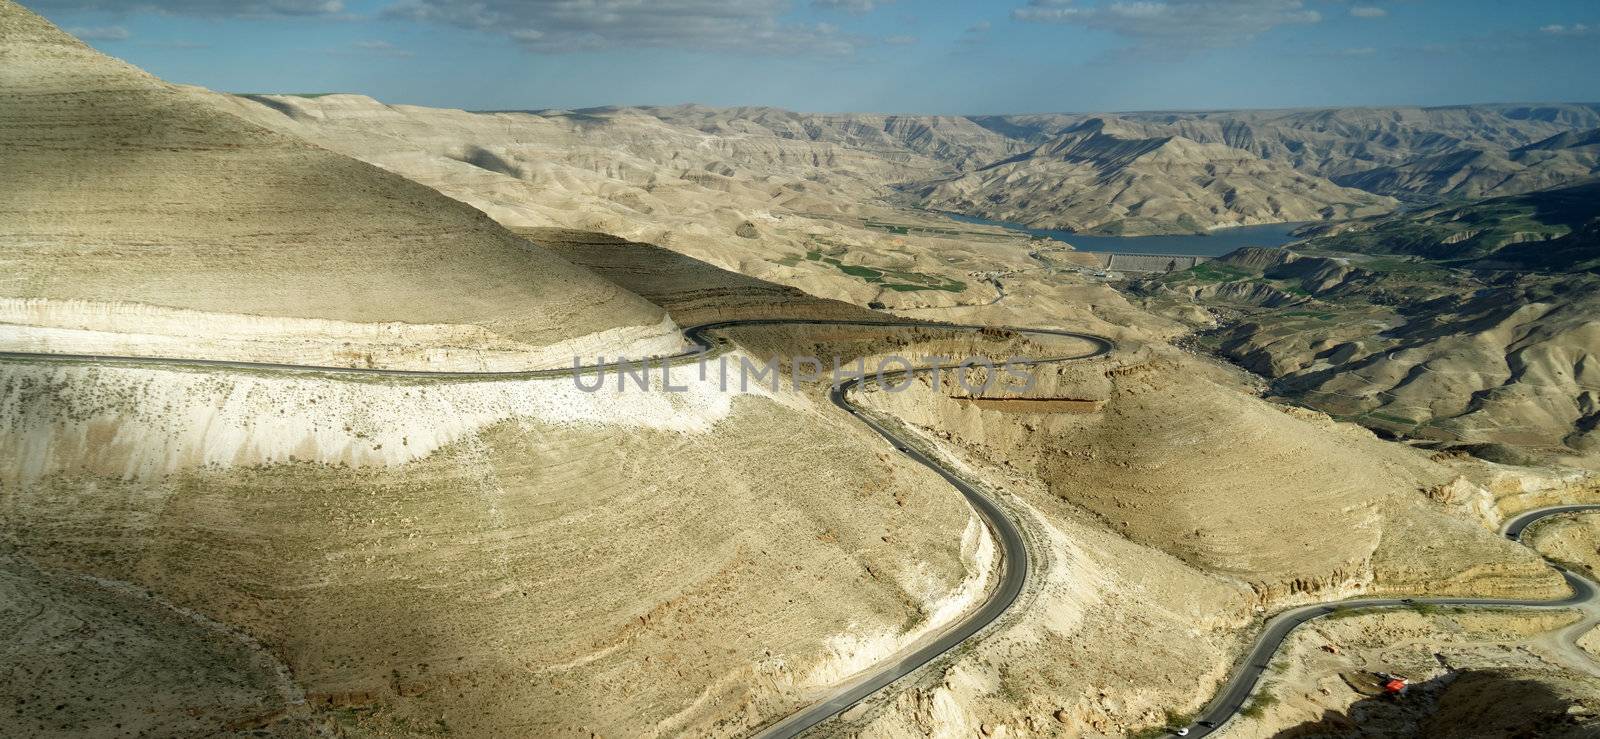 Panoramic view of the King Highway ascending the road north of the Wadi Mujib reservoir in Jordan. by geogif